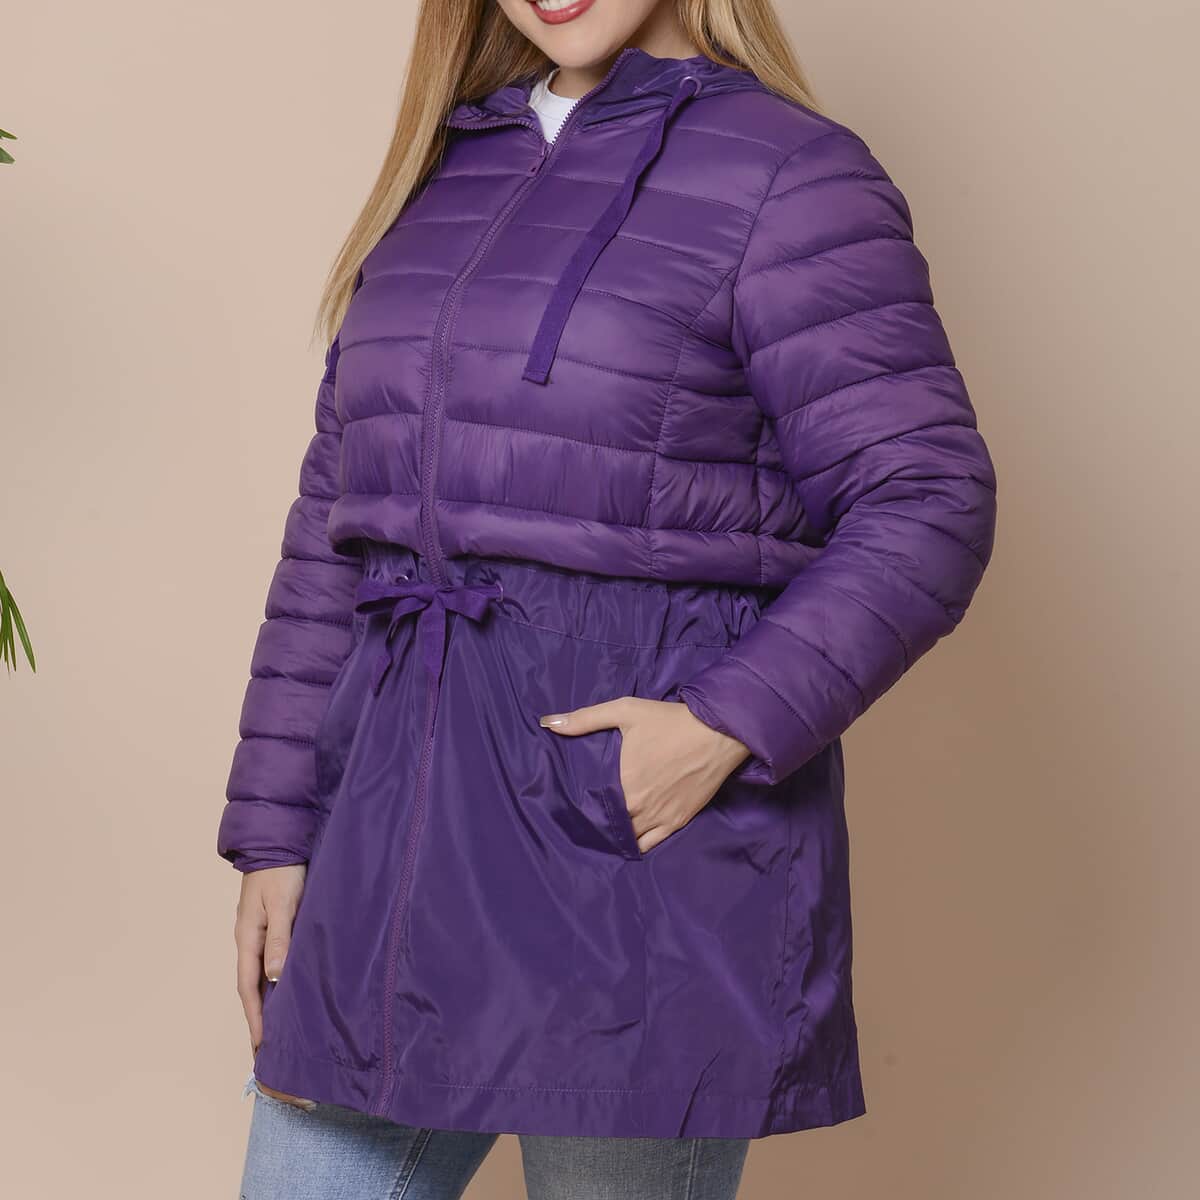 Passage Plum Purple Hooded Women's Coat with Sleeves - L image number 2